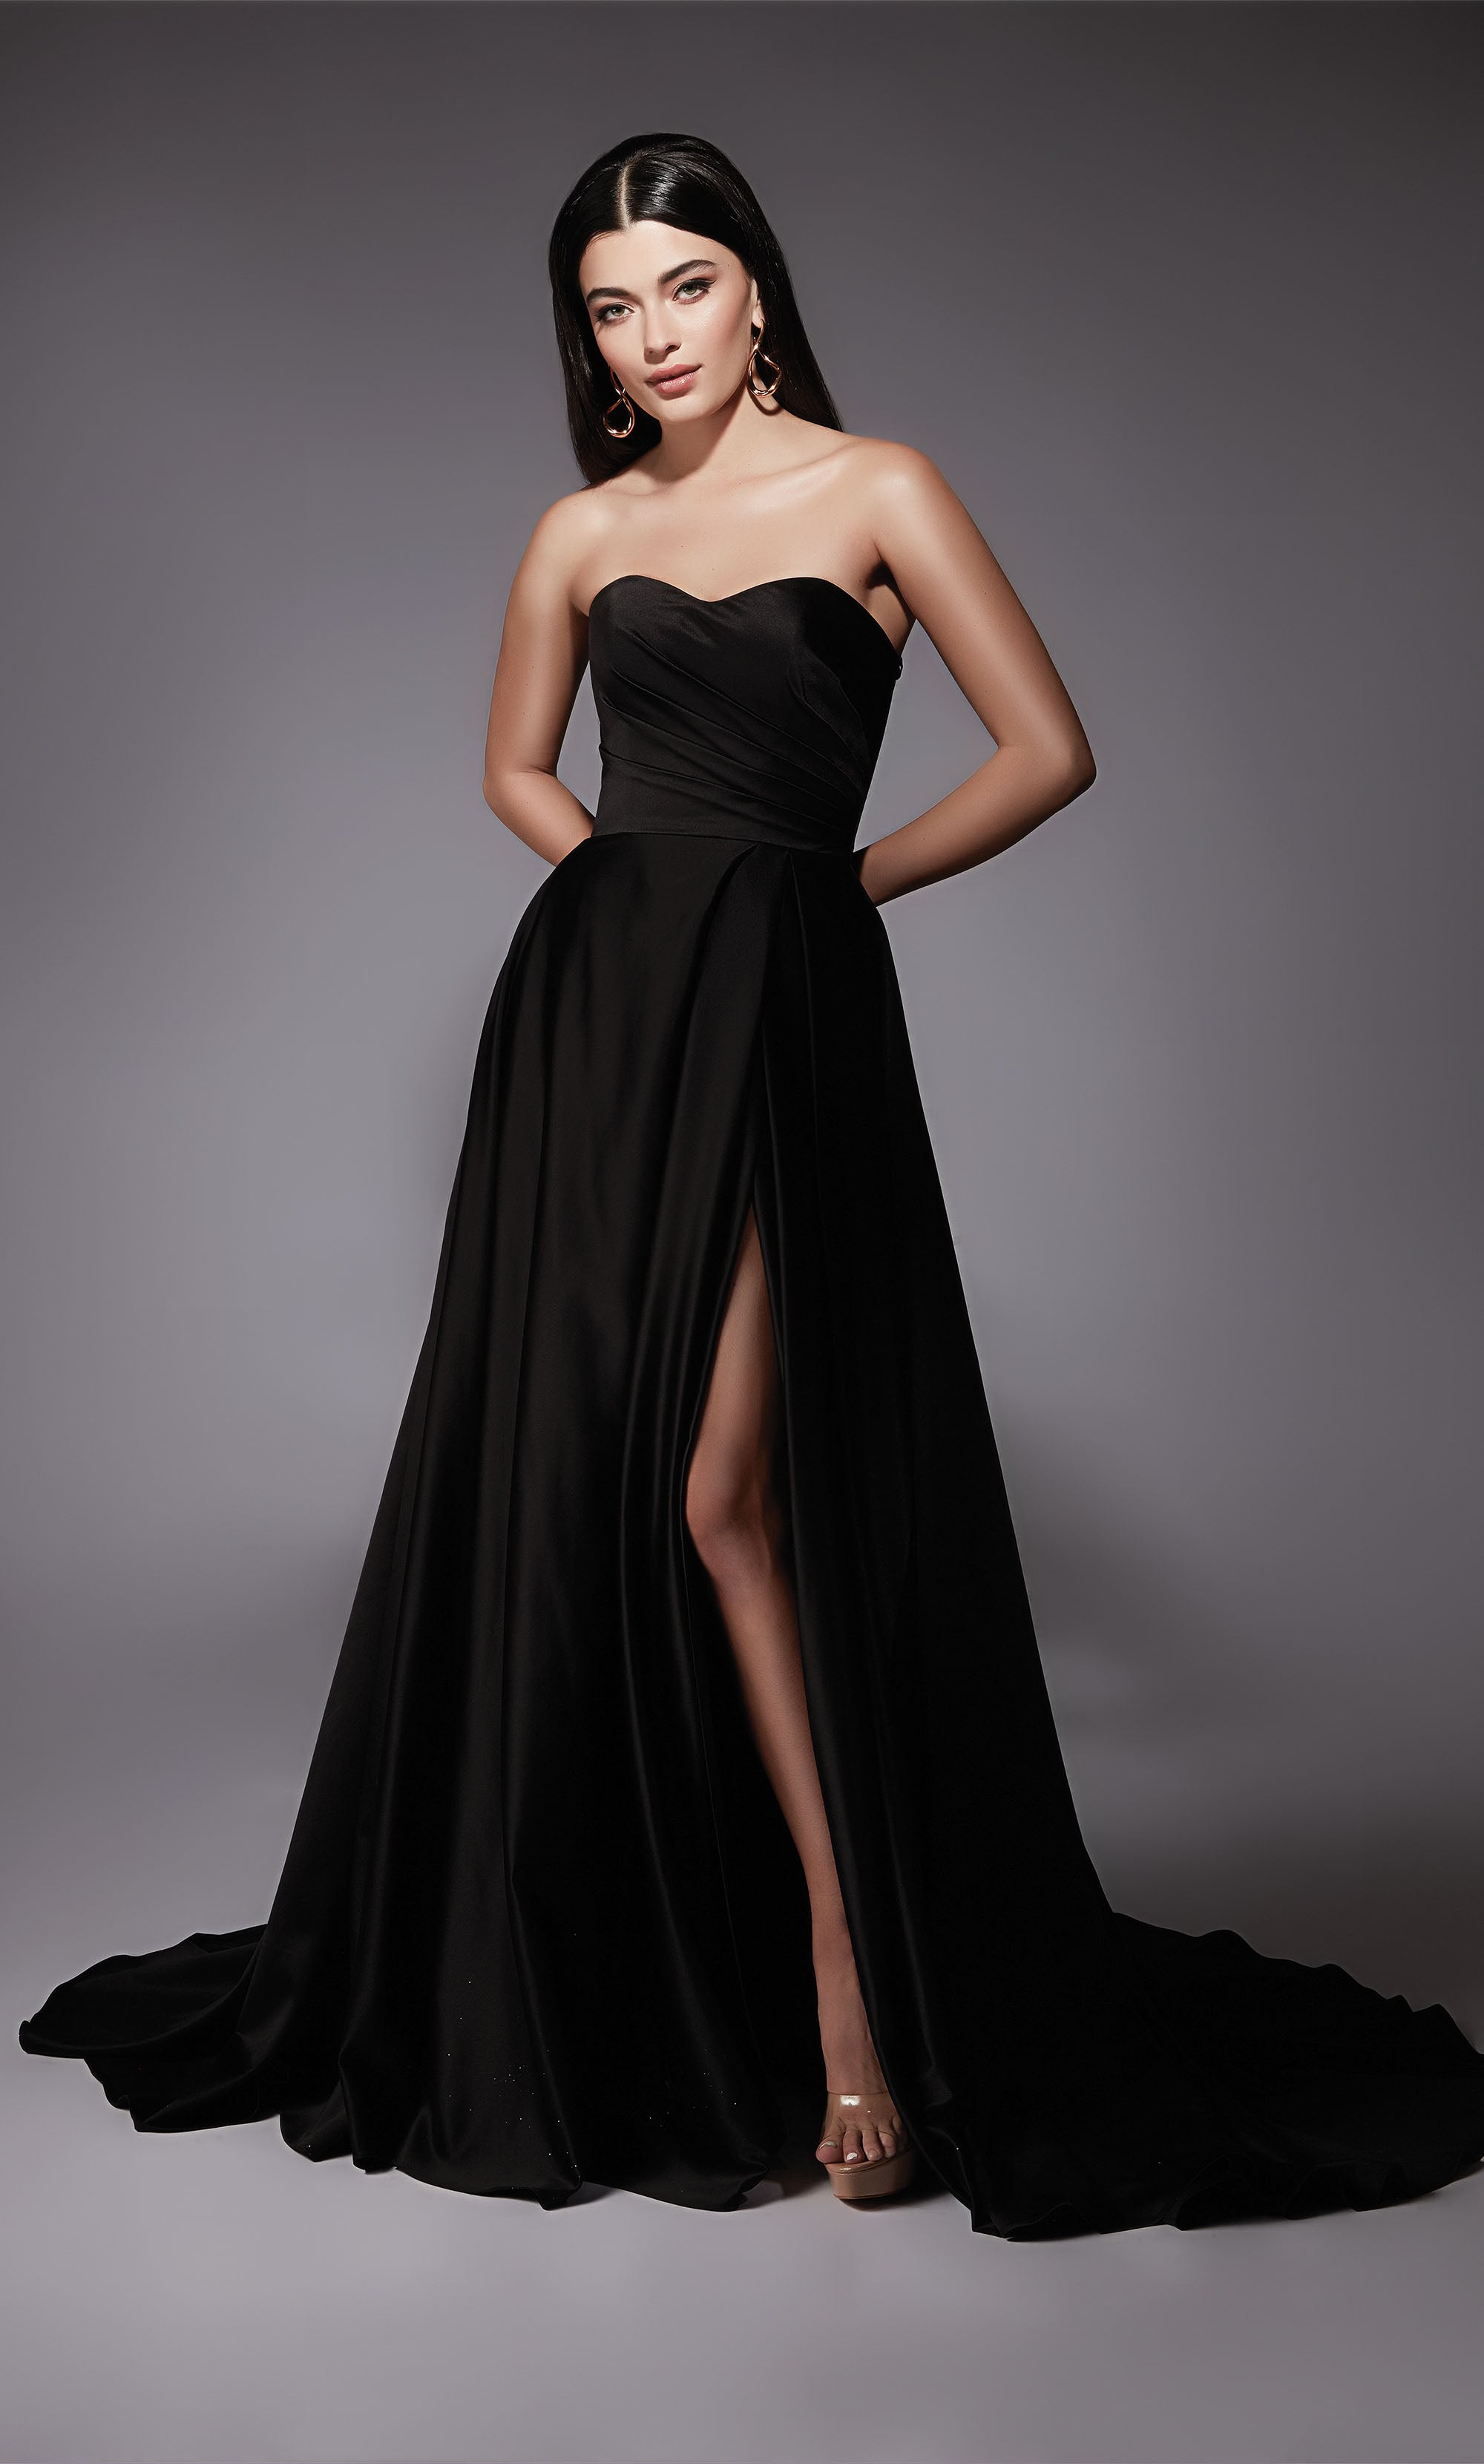 A-line satin bridal gown featuring a strapless, semi-sweetheart neckline, a pleated bodice, and high side slit in the color Black.